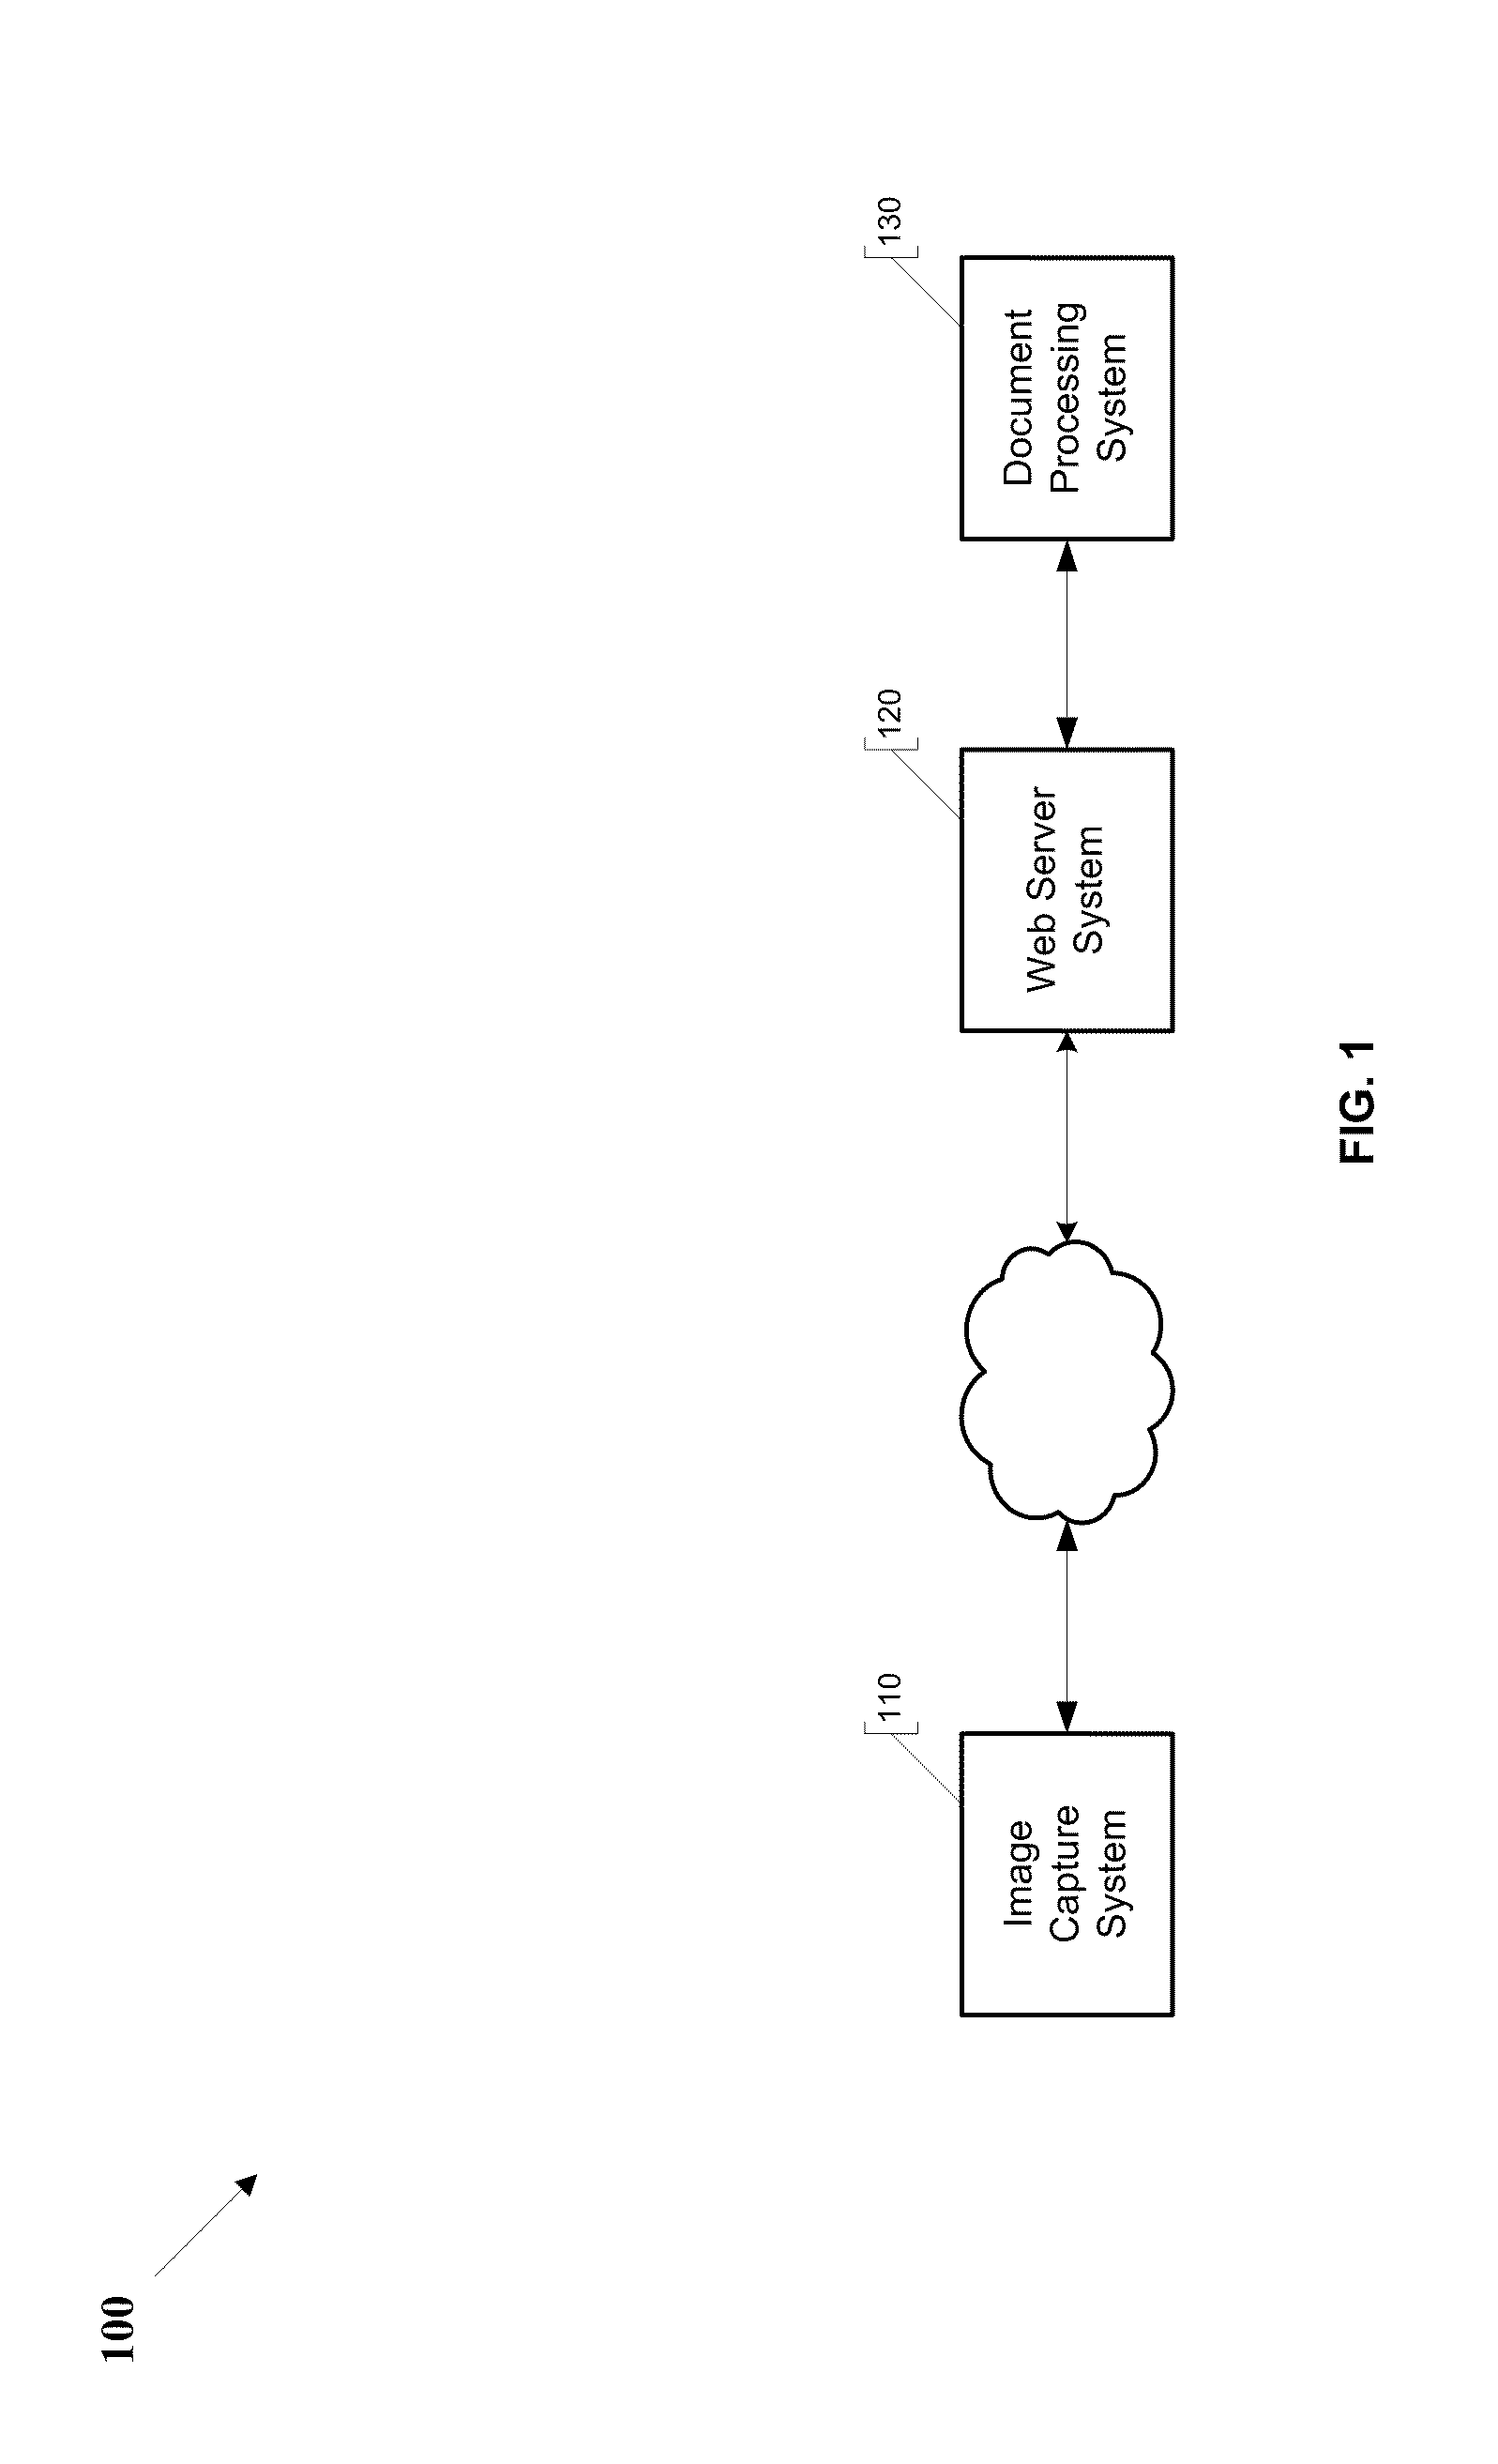 Systems and methods for automatically reducing data search space and improving data extraction accuracy using known constraints in a layout of extracted data elements